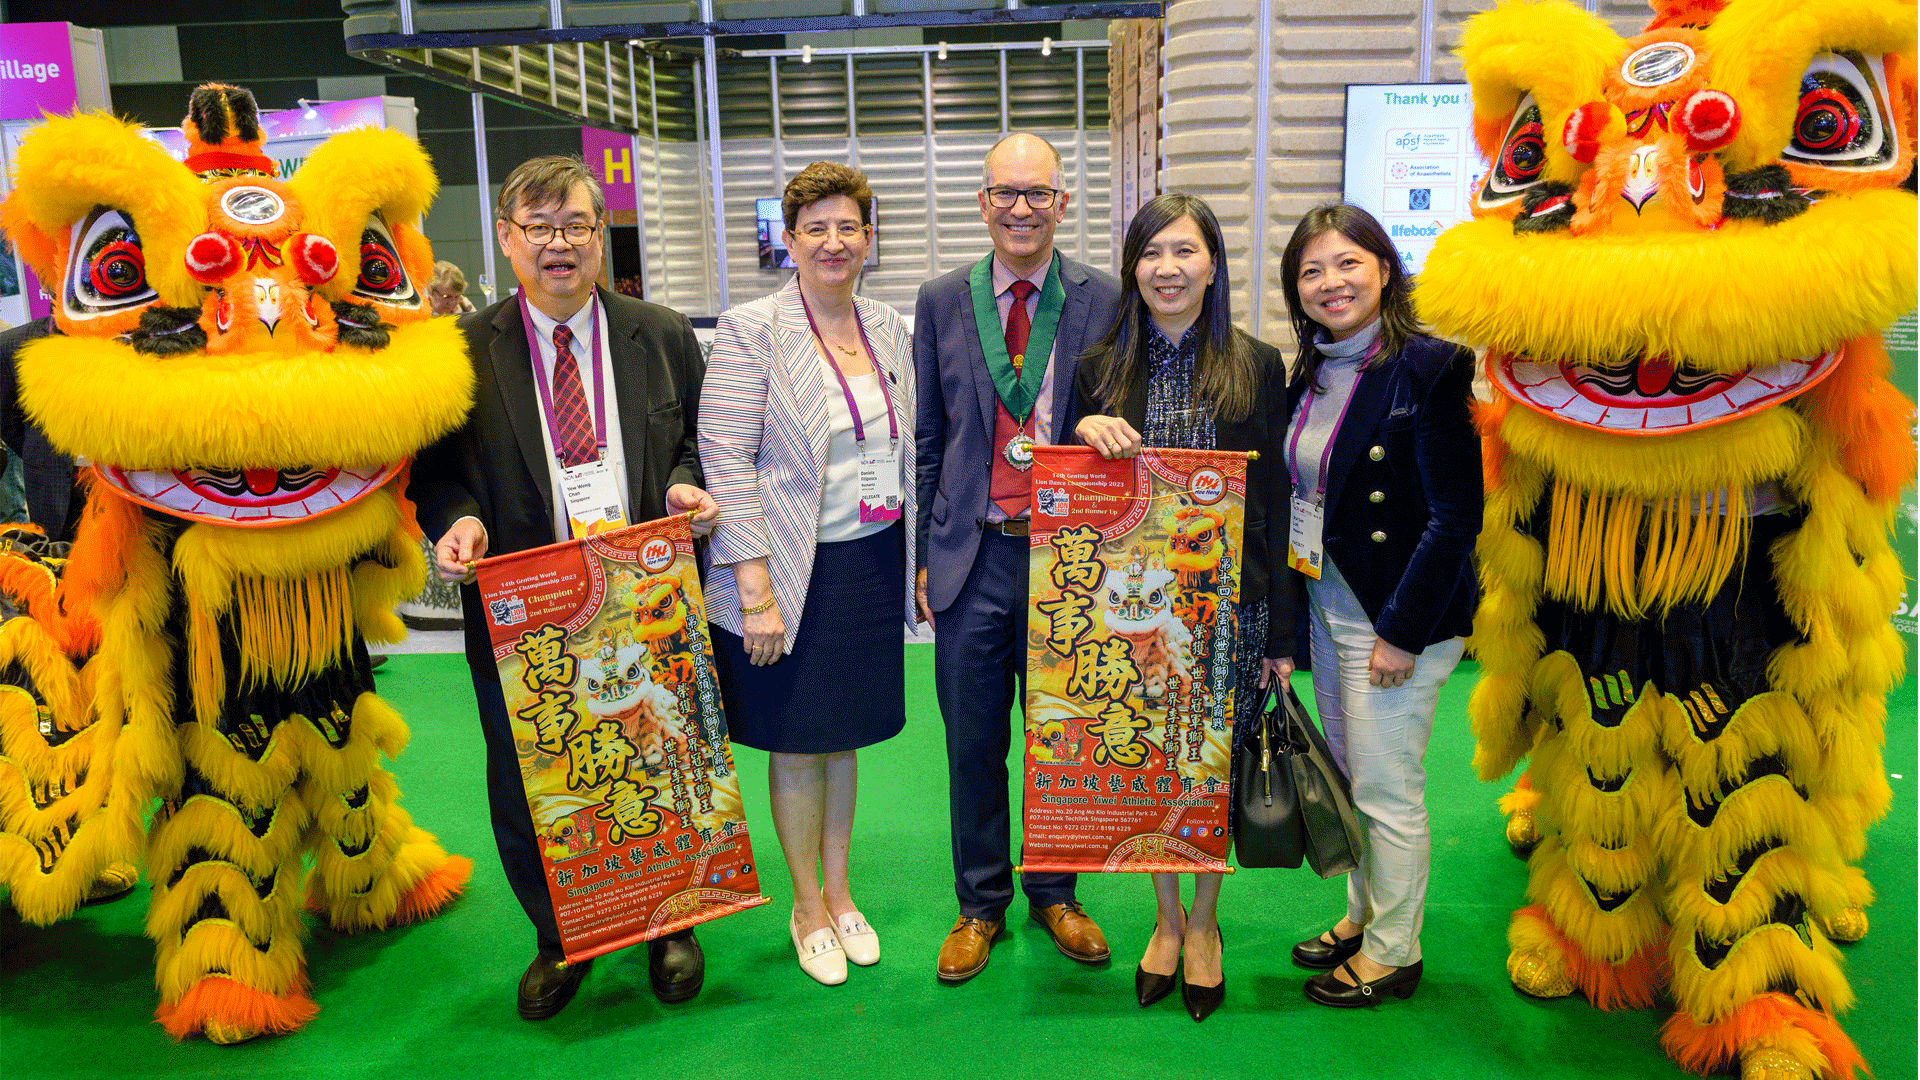 Assoc Prof Yew Weng Chan (Singapore Local Organising Committee Chair), Prof Daniela Filipescu (WFSA President), Assoc Prof Wayne Morriss (WFSA Past President), Assoc Prof Sophia Chew (SSA President), Assoc Prof Pui San Loh (Cochair of the WCA Sustainability Track) at the WCA 2024